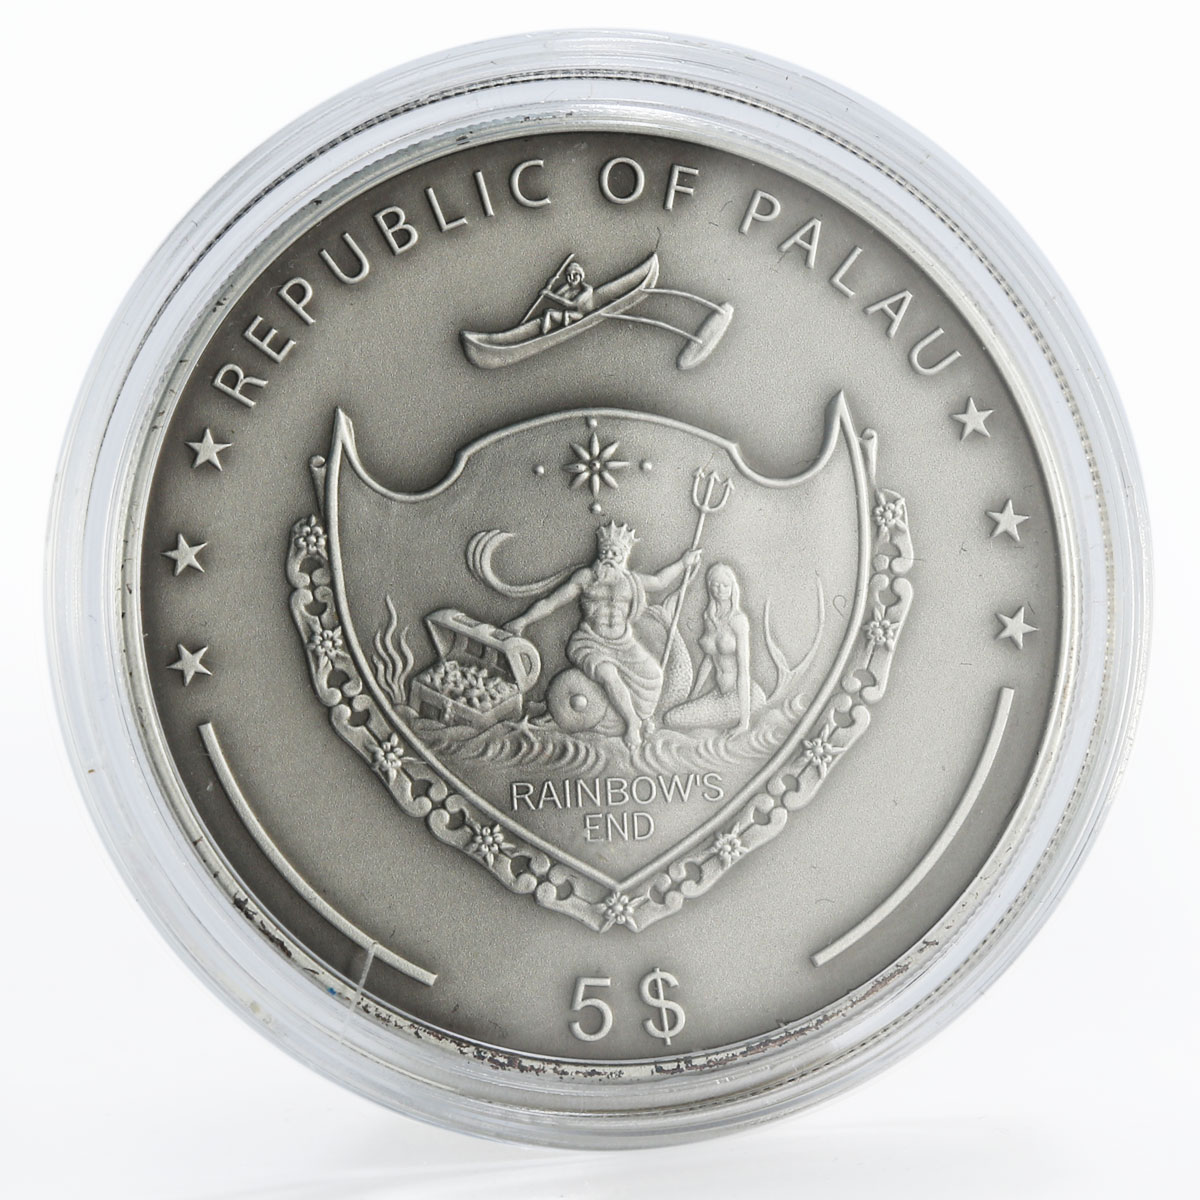 Palau 5 dollars Treasures of the World Ruby miners silver coin 2011